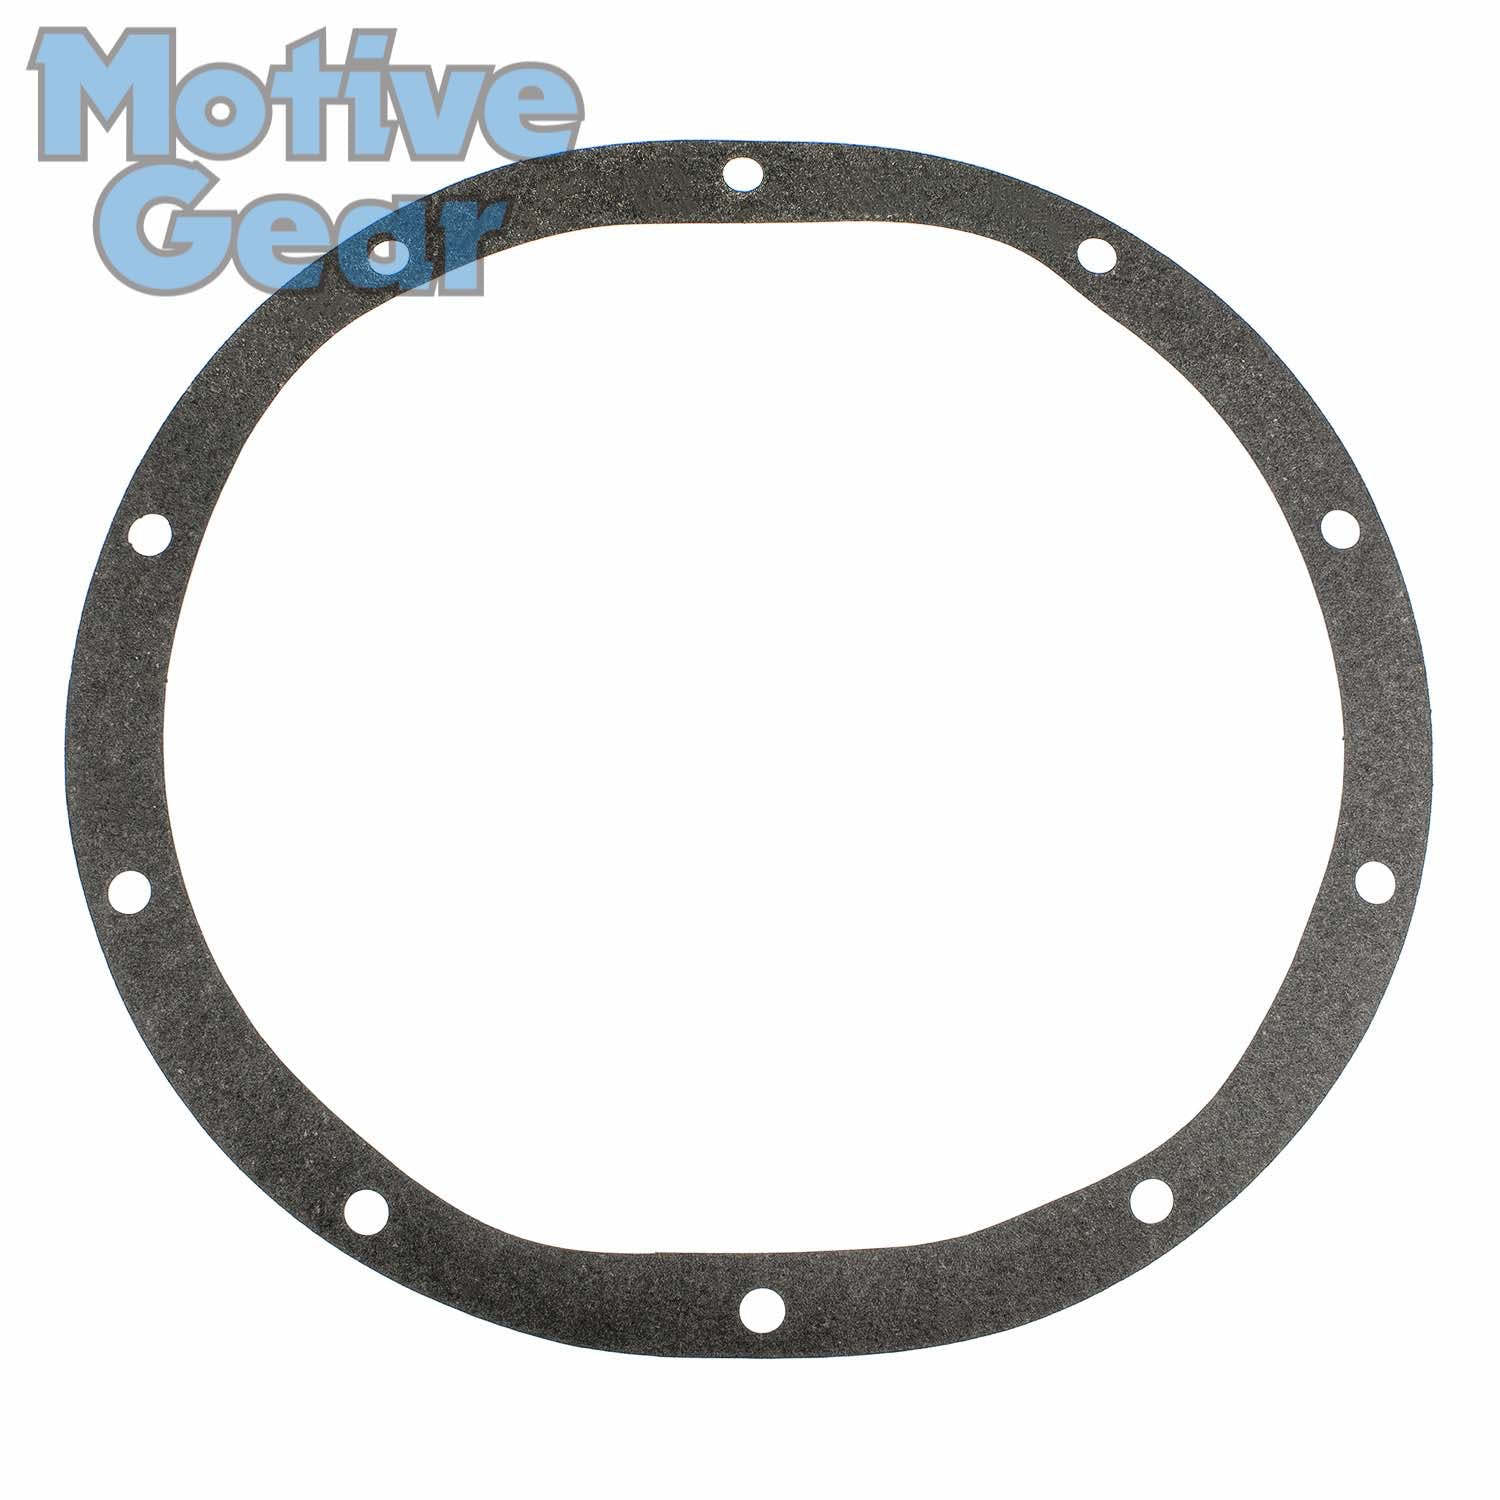 Motive Gear 5131 GASKET Differential Cover Gasket